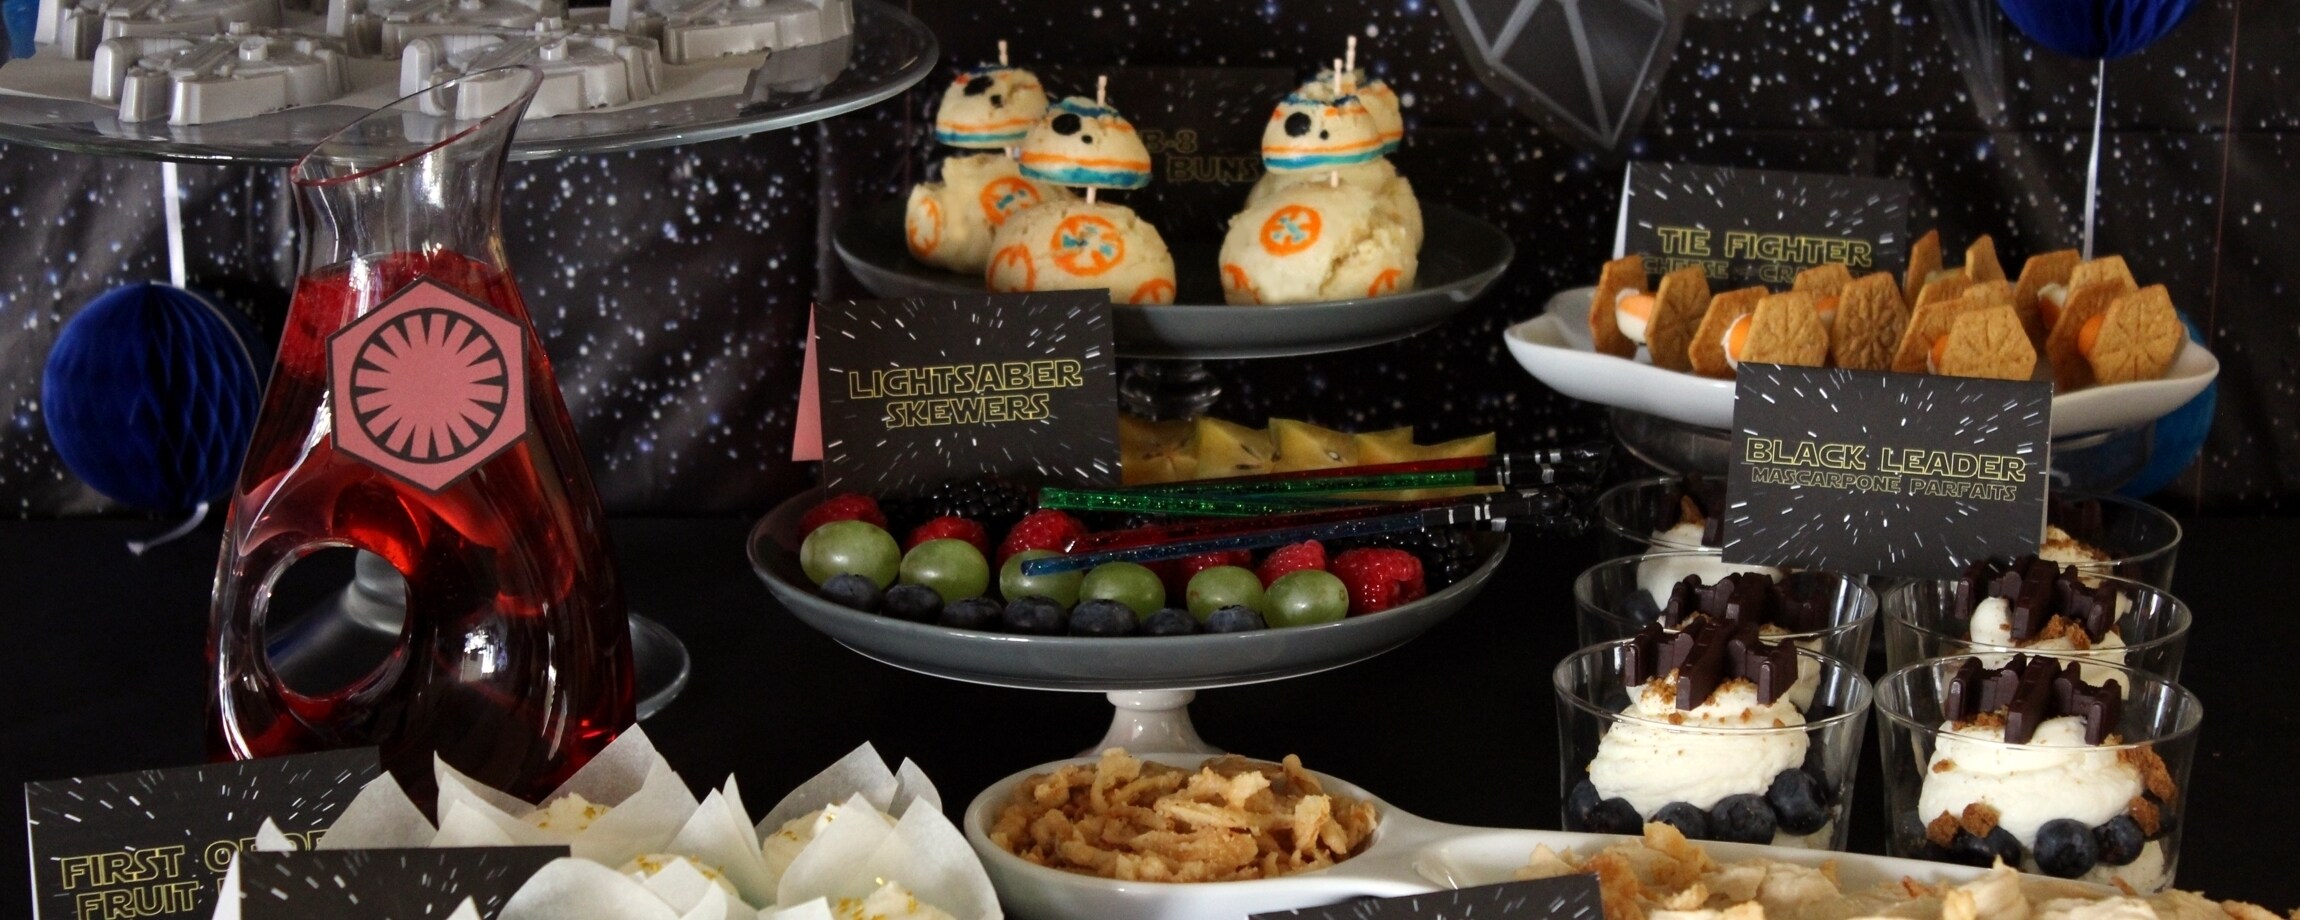 Star Wars: The Force Awakens Party 